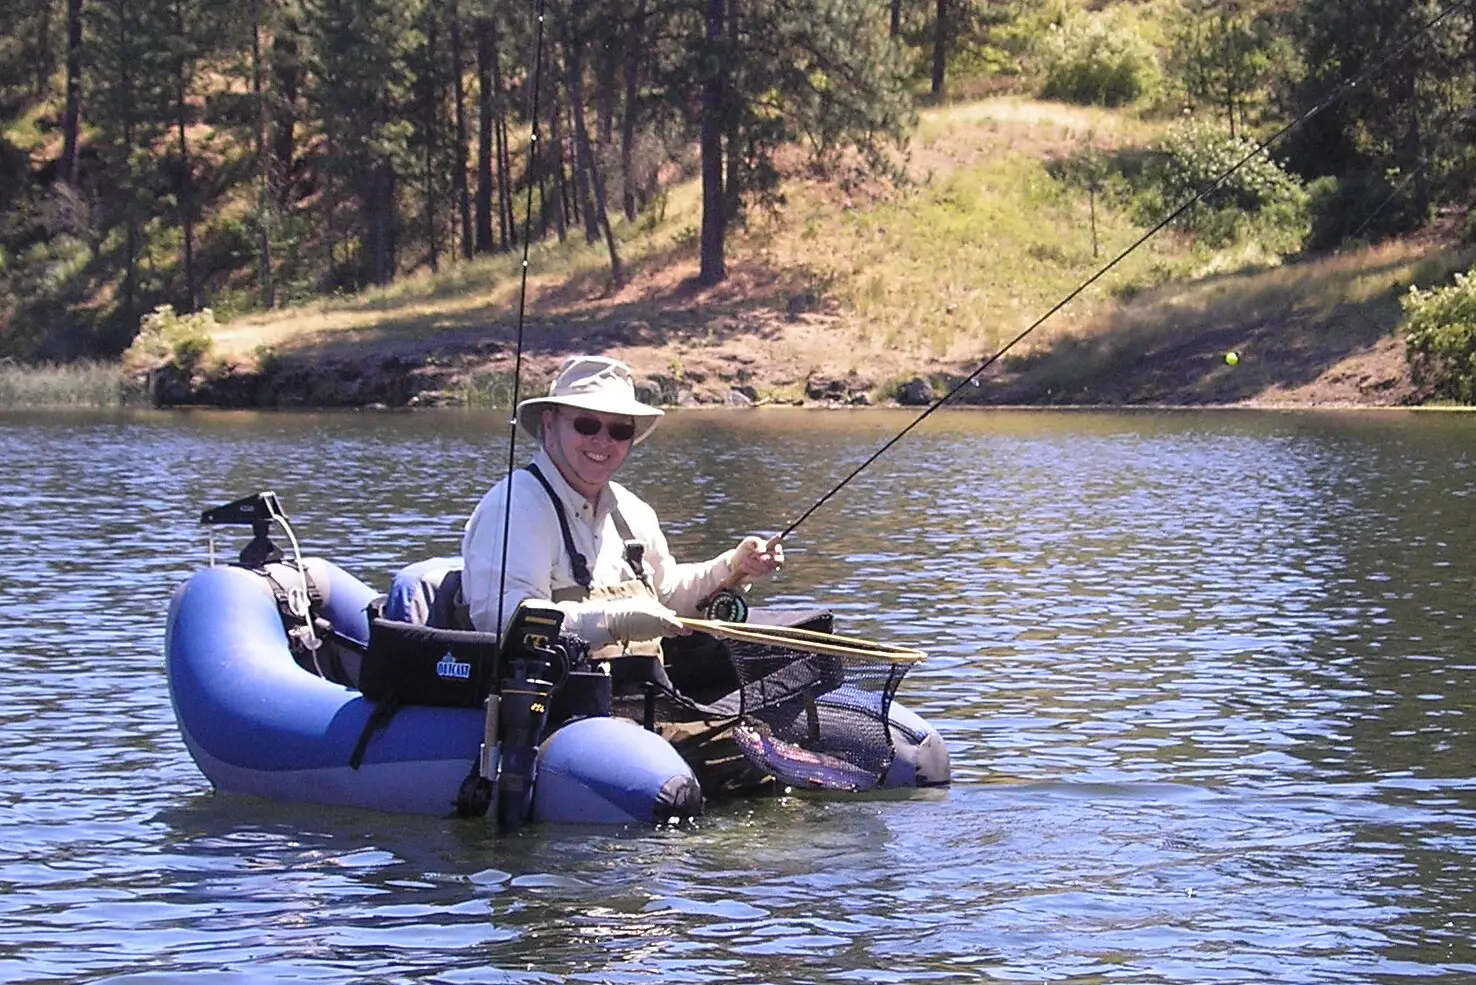 Personal Watercraft for Fishing NWFR